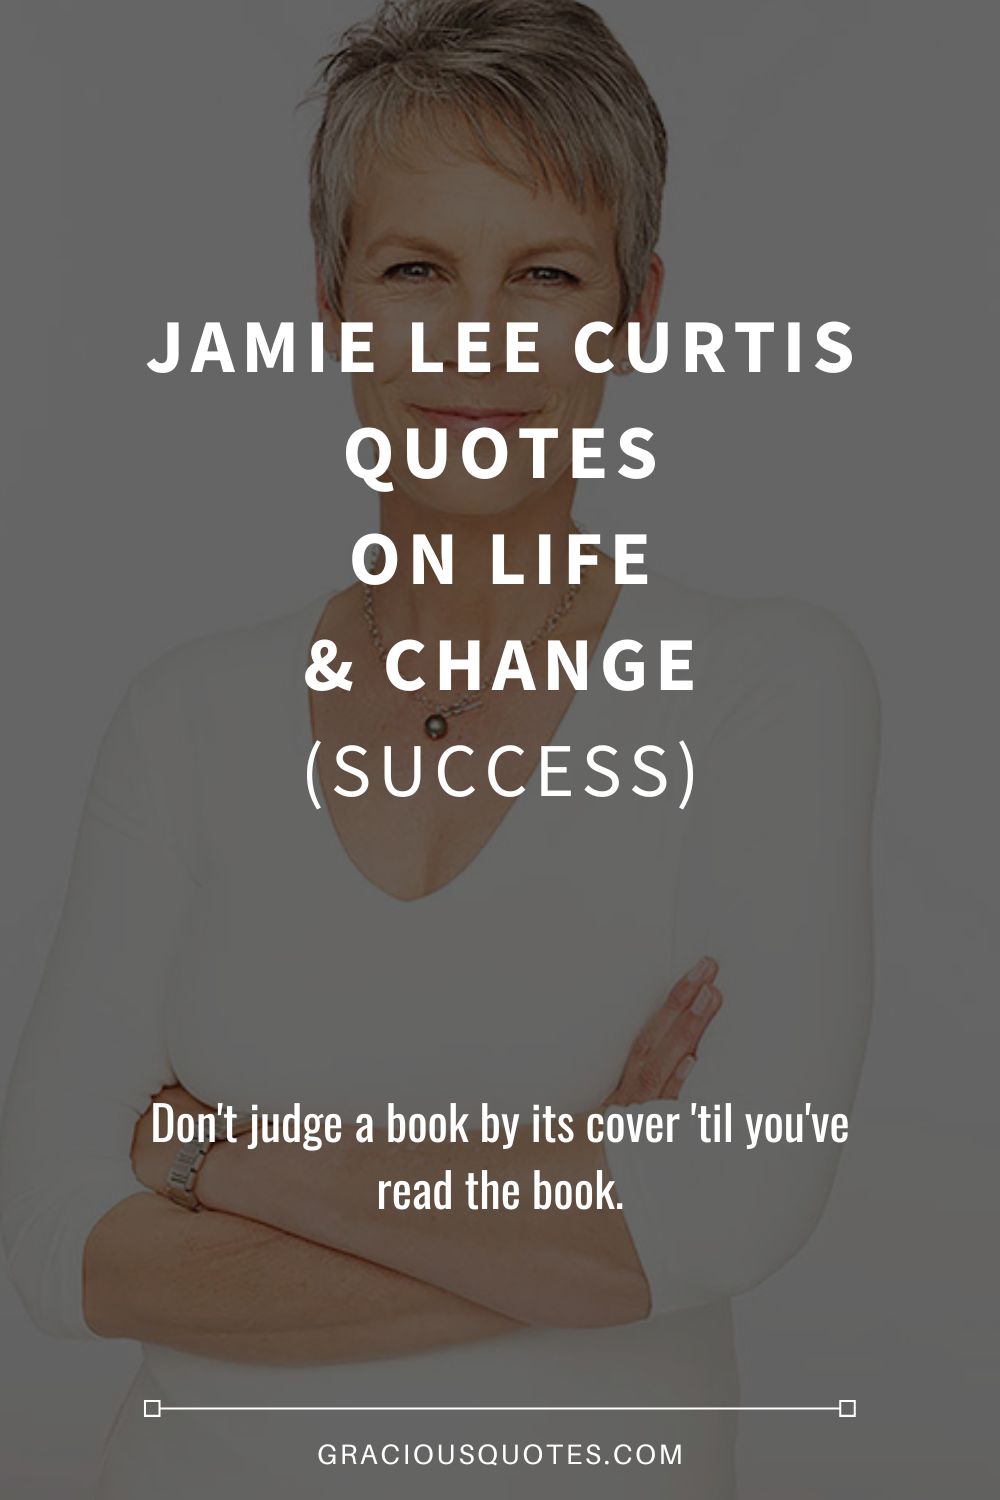 Jamie Lee Curtis Quotes on Life & Change (SUCCESS) - Gracious Quotes